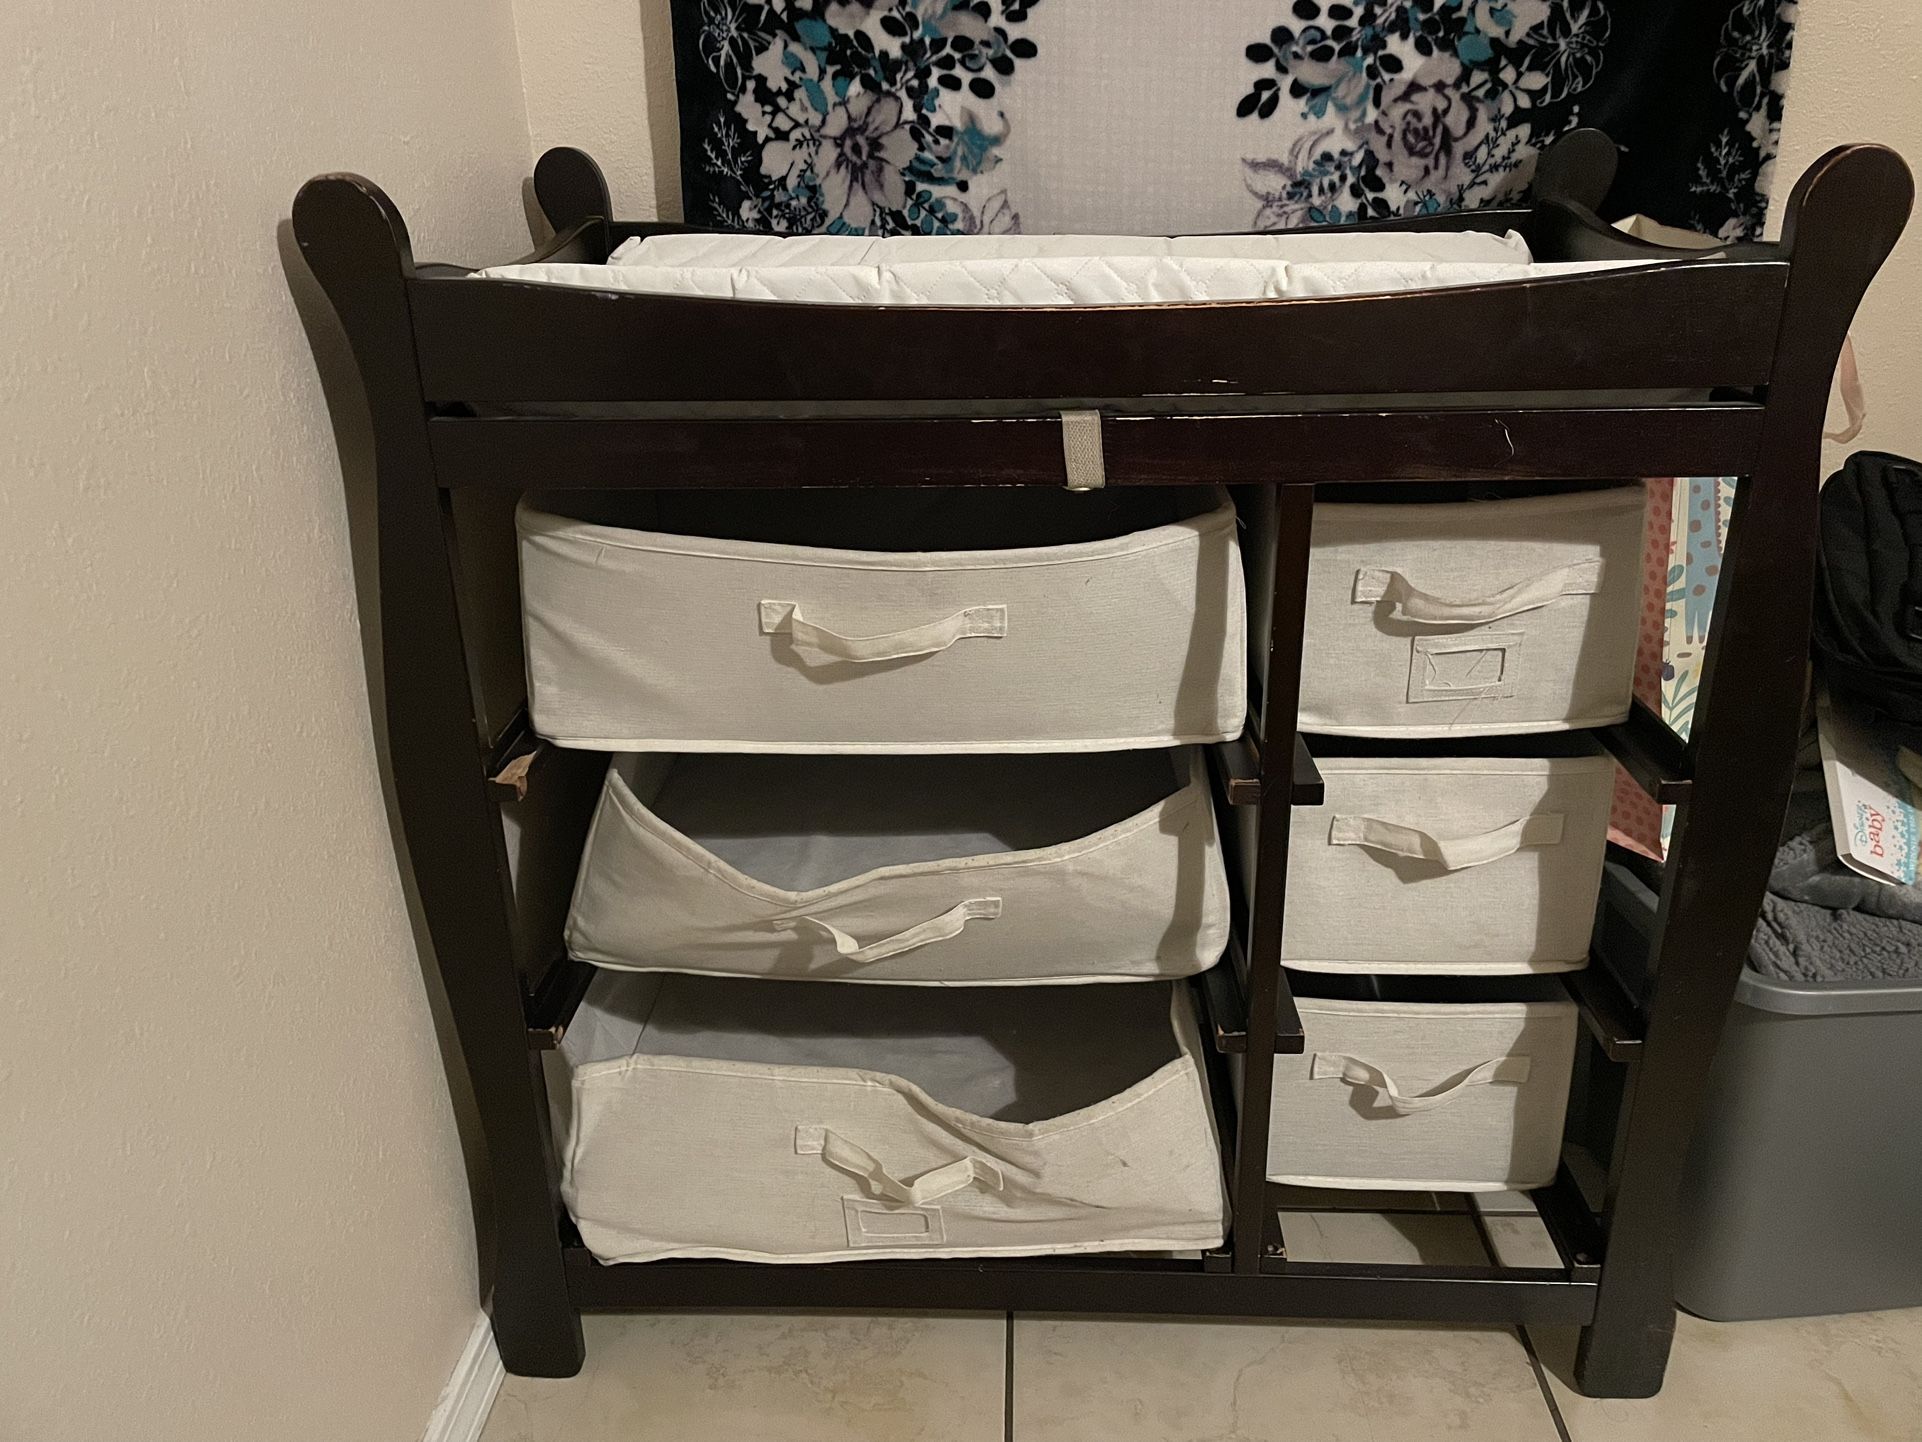 Used changing table